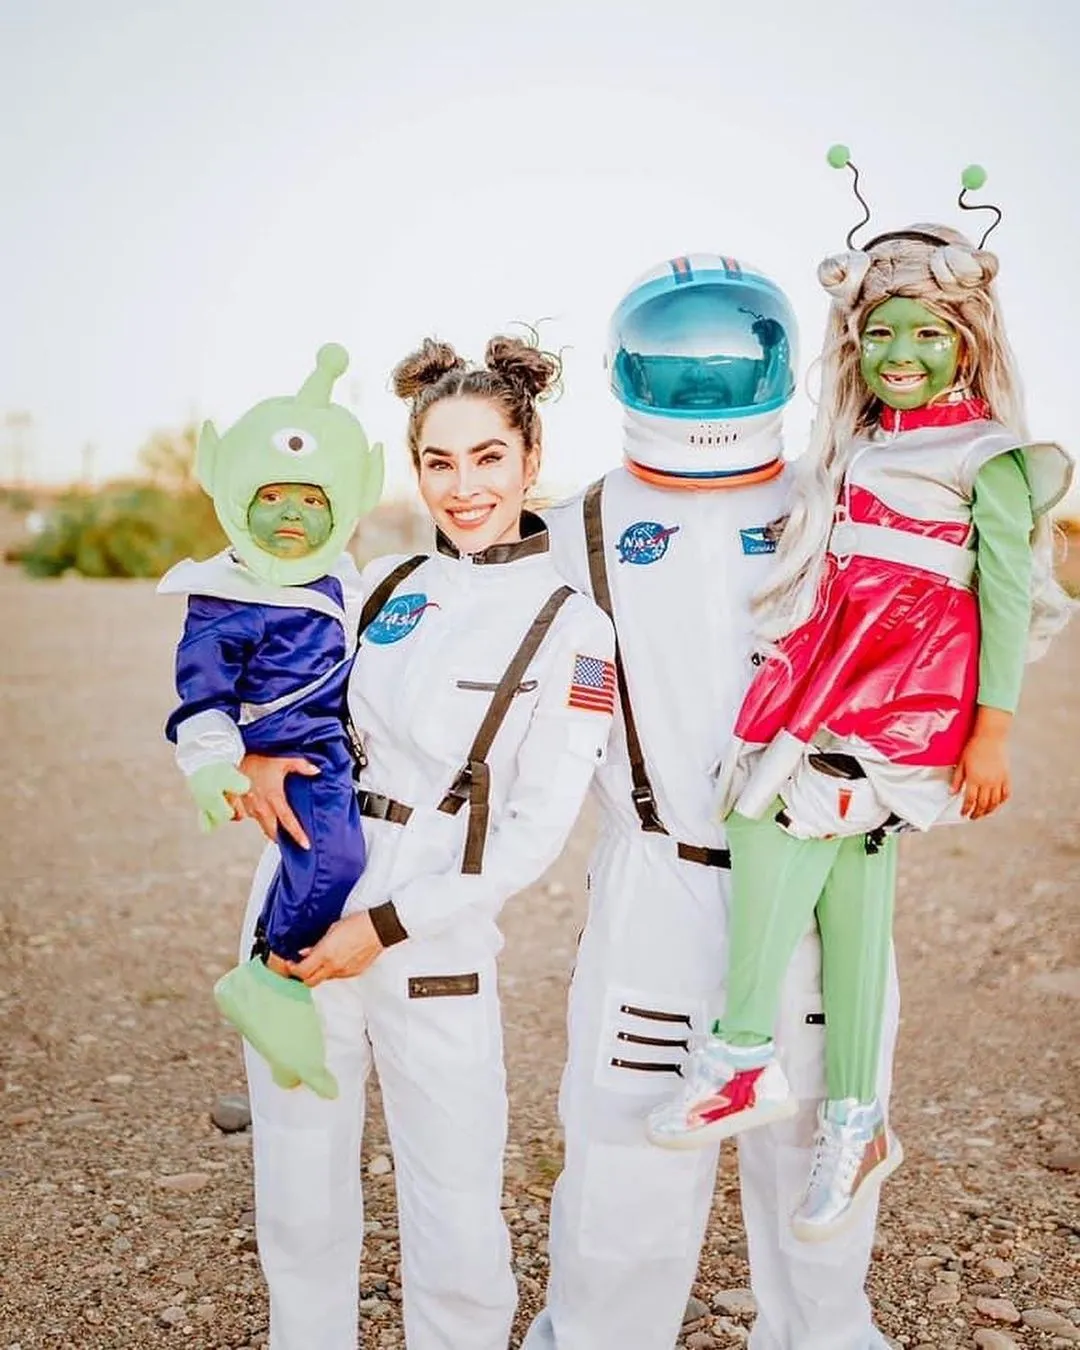 family of 4 Halloween costumes + astronaut and alien family costumes